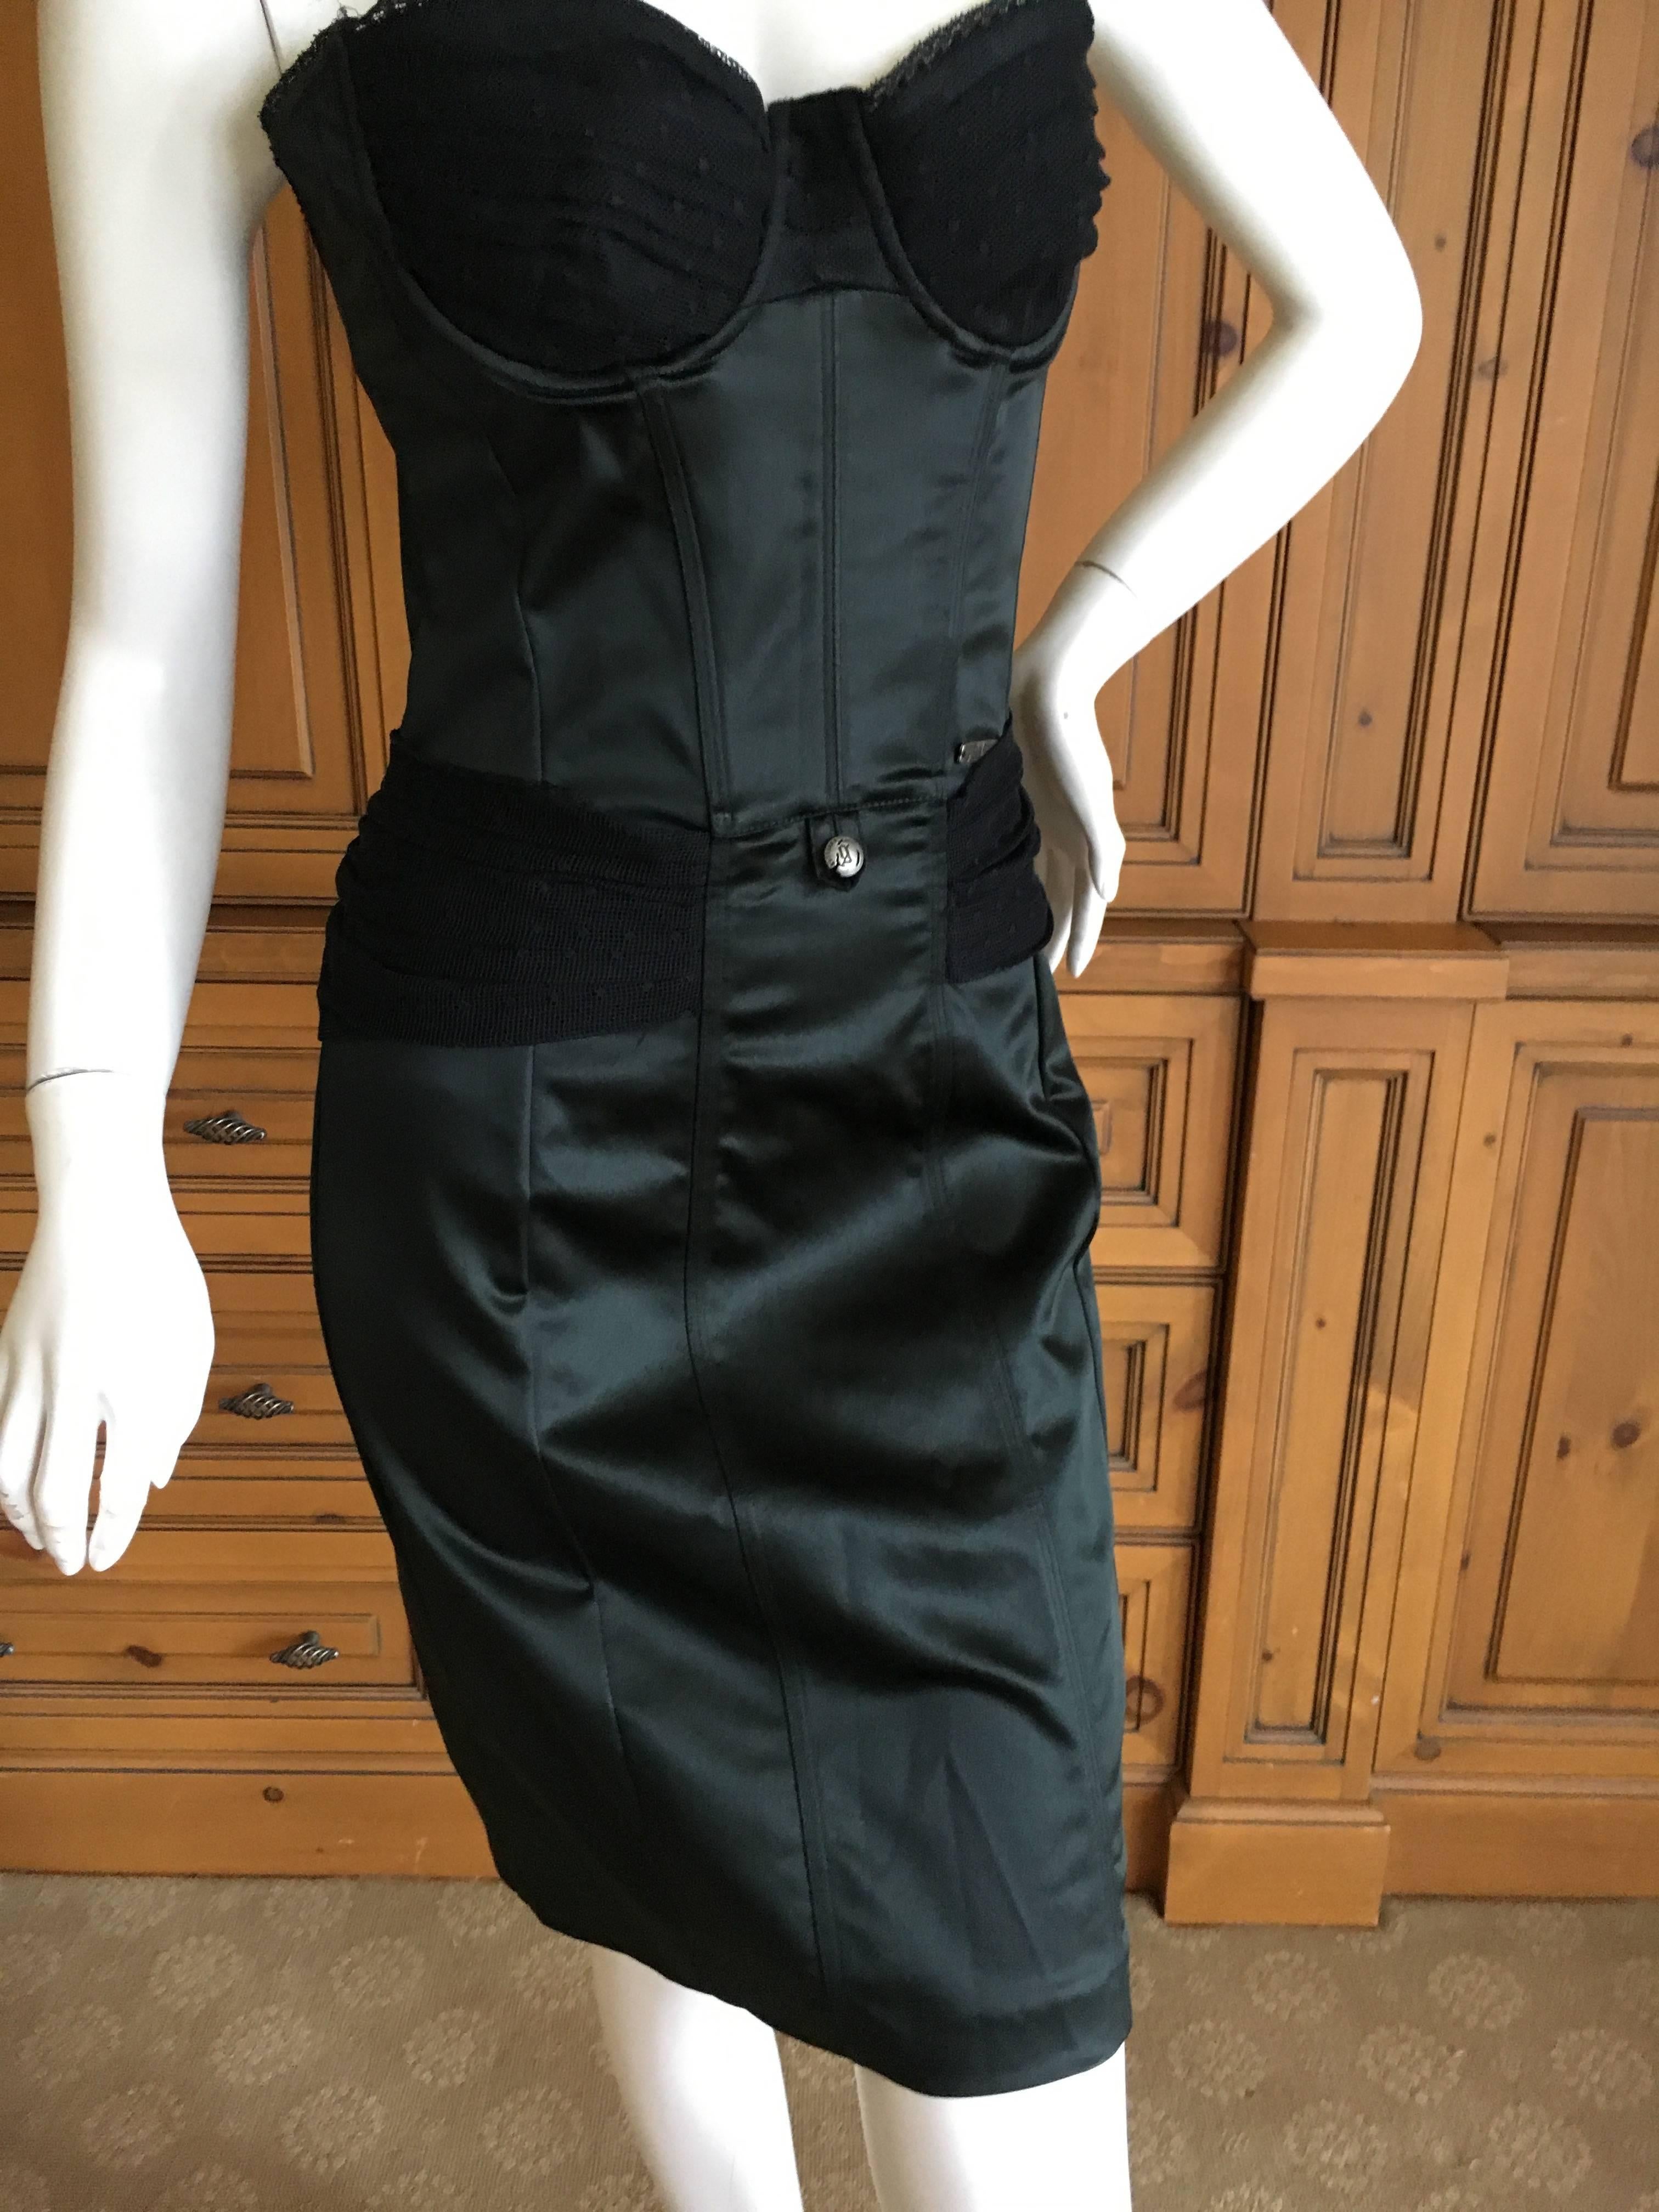 Super sexy little black corset dress from John Galliano.
Full upper corset in tulle, with satin body con dress.
Size 40
Bust 36